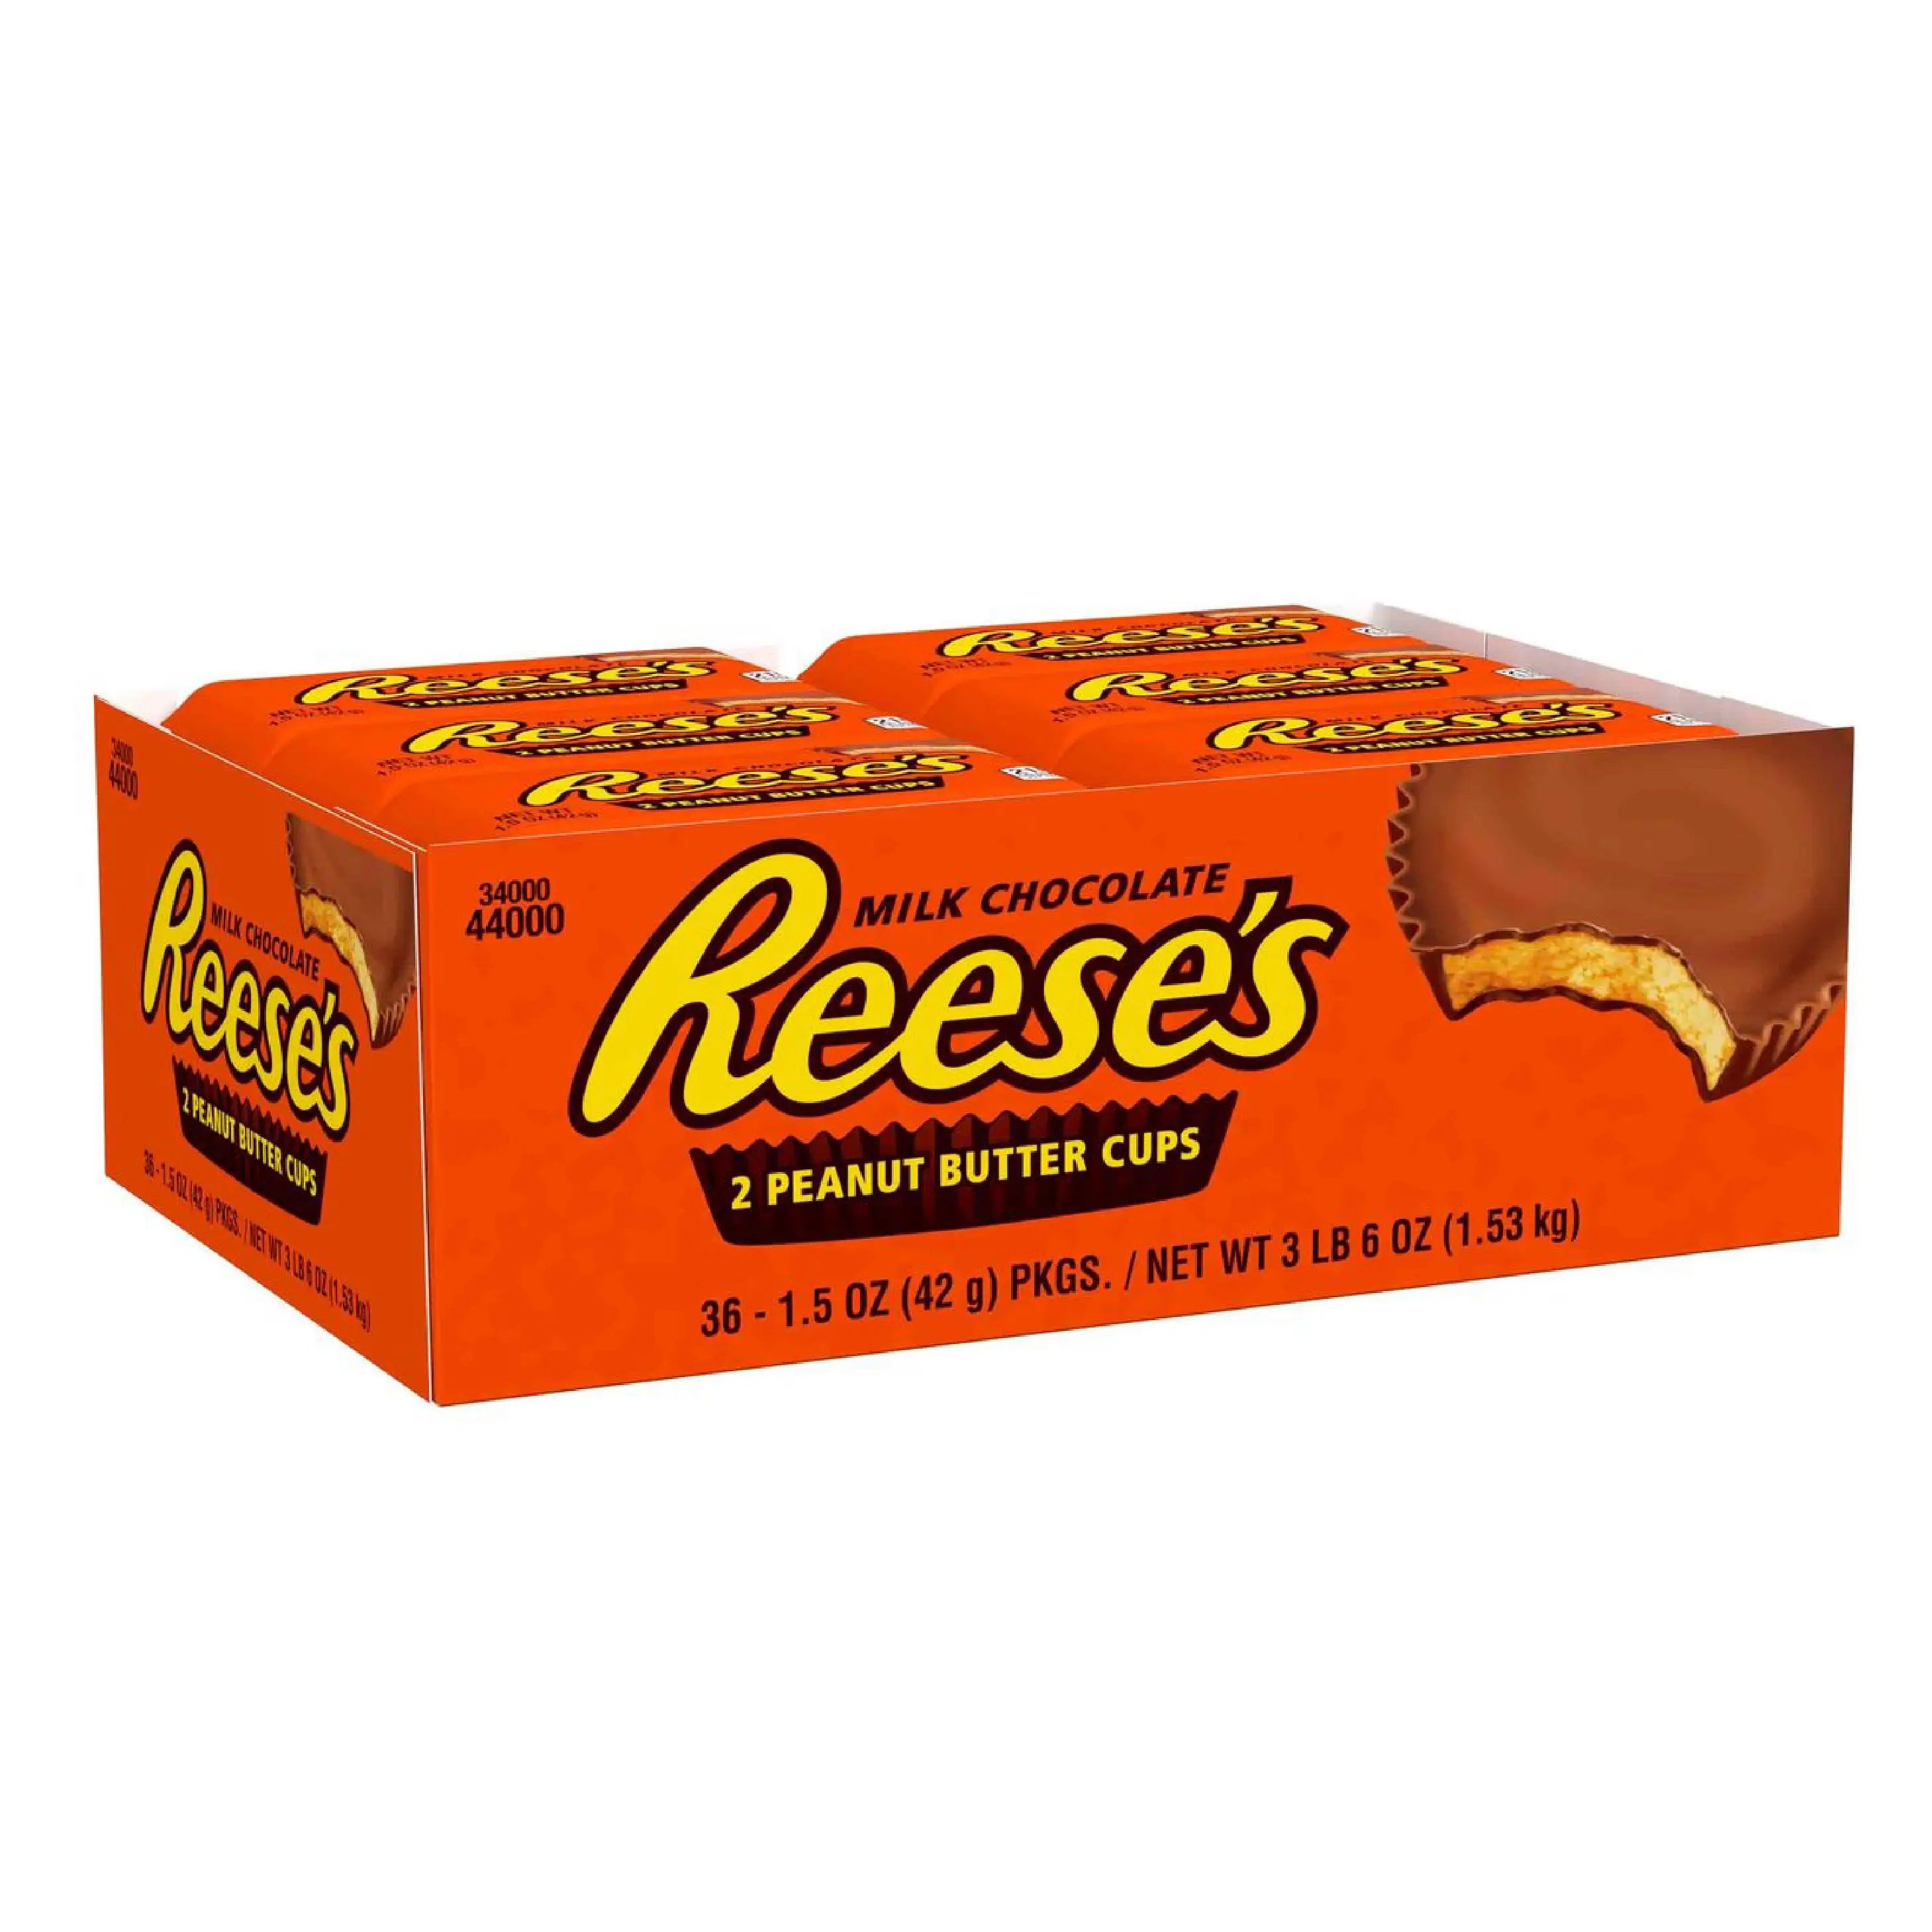 Reese's 2 Peanut Butter Cups - My American Shop